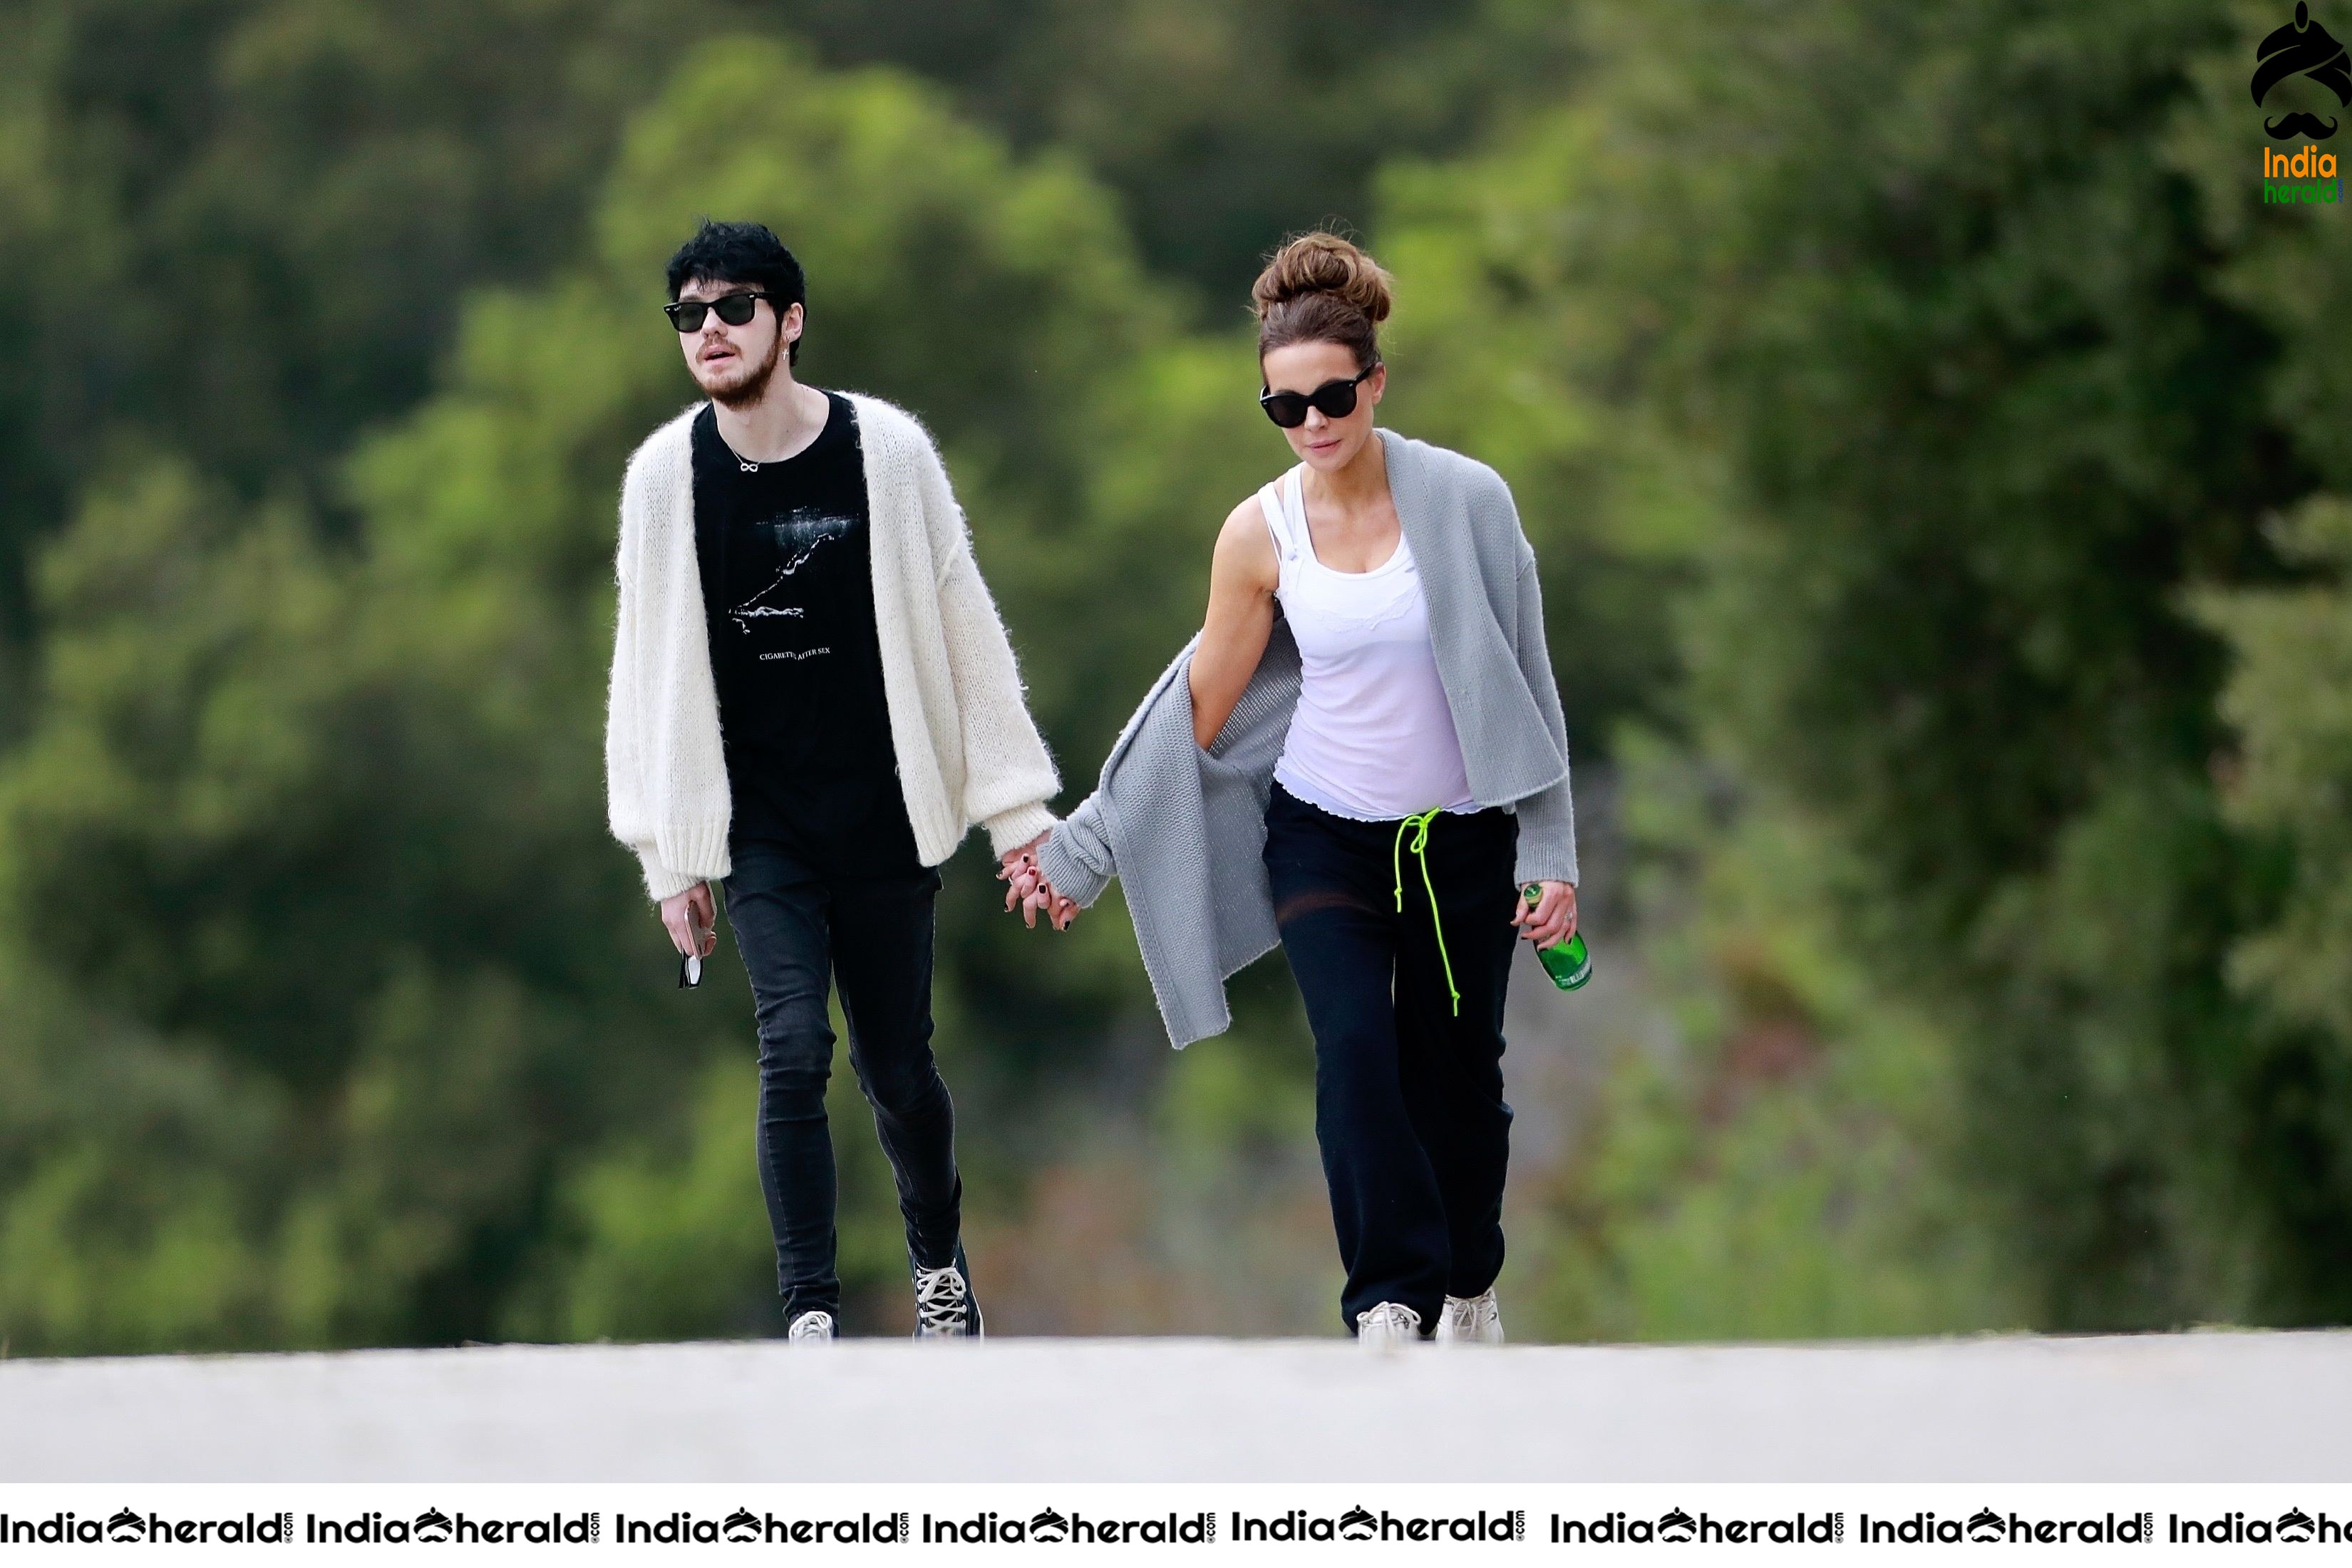 Kate Beckinsale takes a walk with her Boyfriend in Brentwood during Lockdown